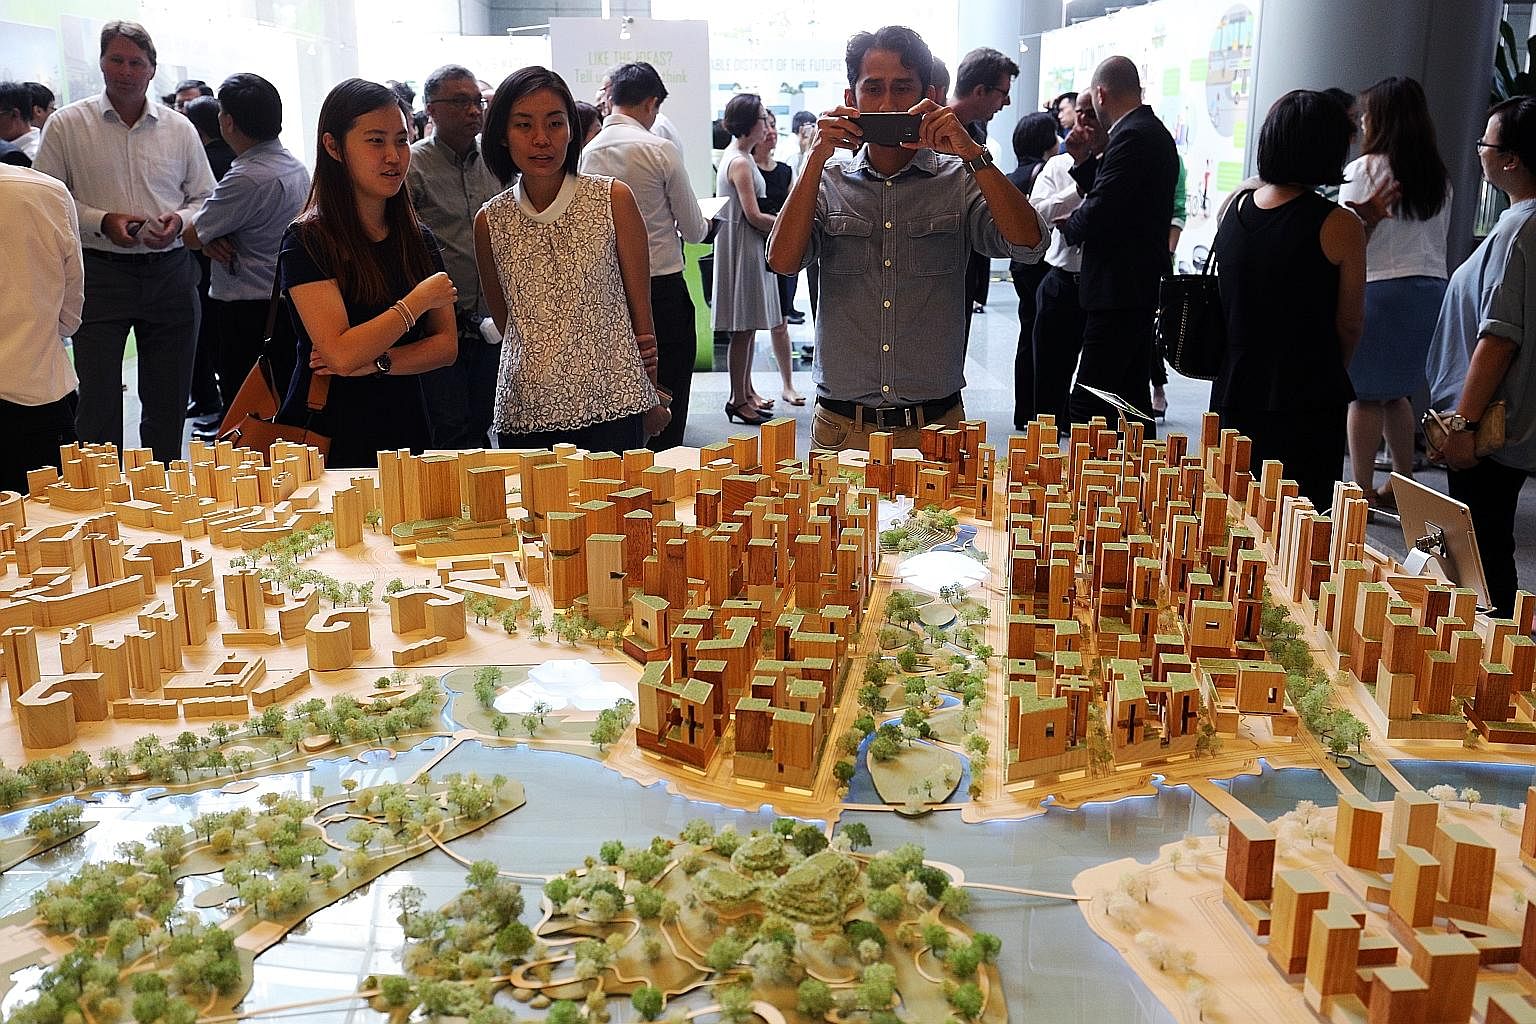 The Punggol Digital District masterplan aims to transform the area into a hub for the digital economy's key growth sectors. The district will also serve as a test bed for a slew of new features and planning practices. The zoning rules - which affect 